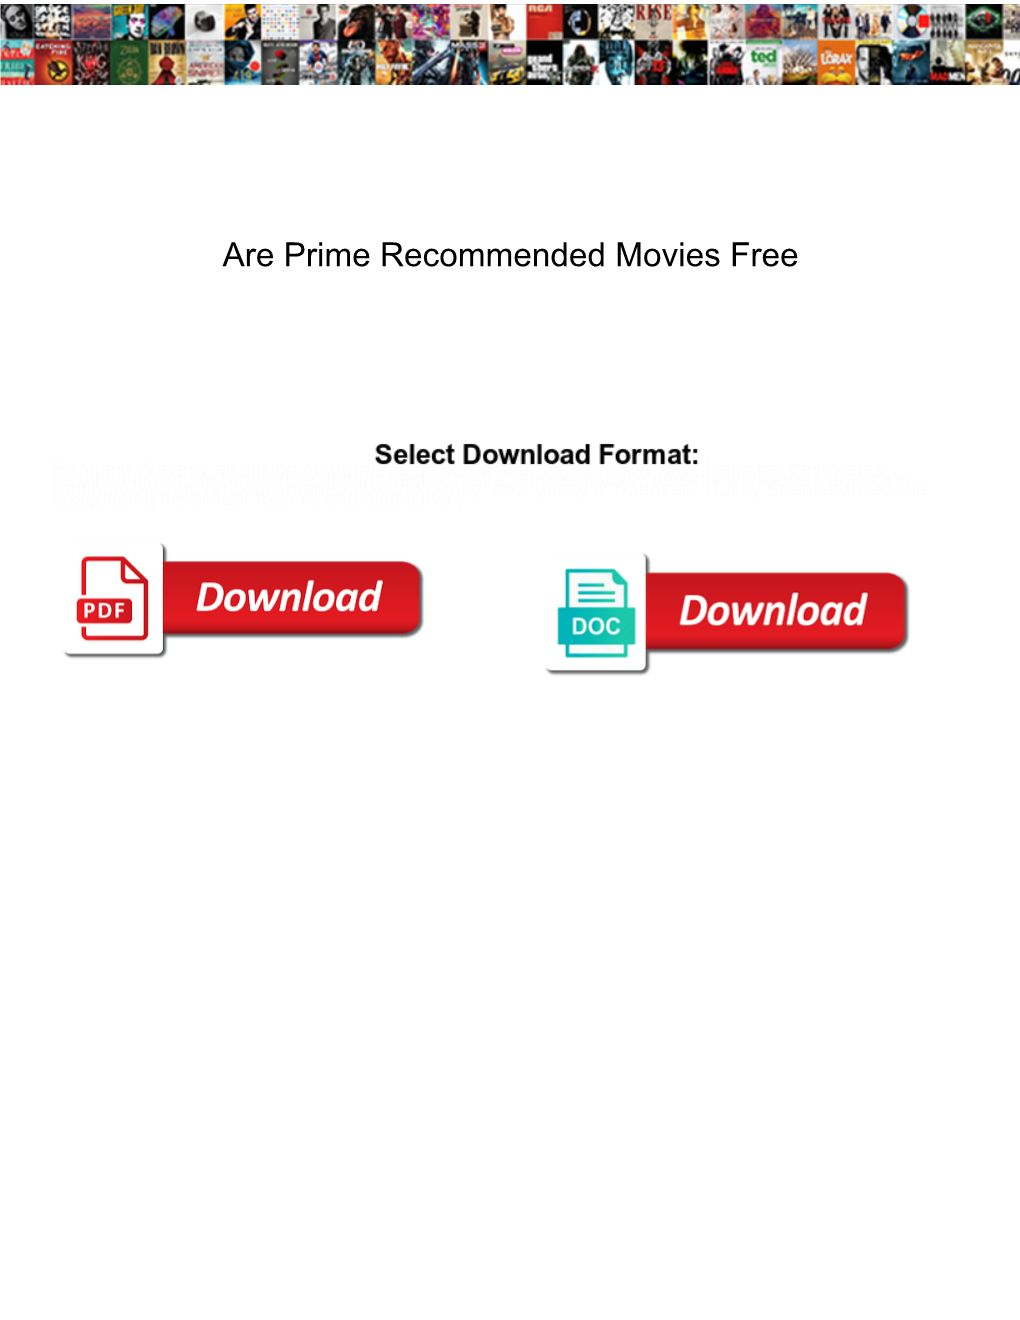 Are Prime Recommended Movies Free